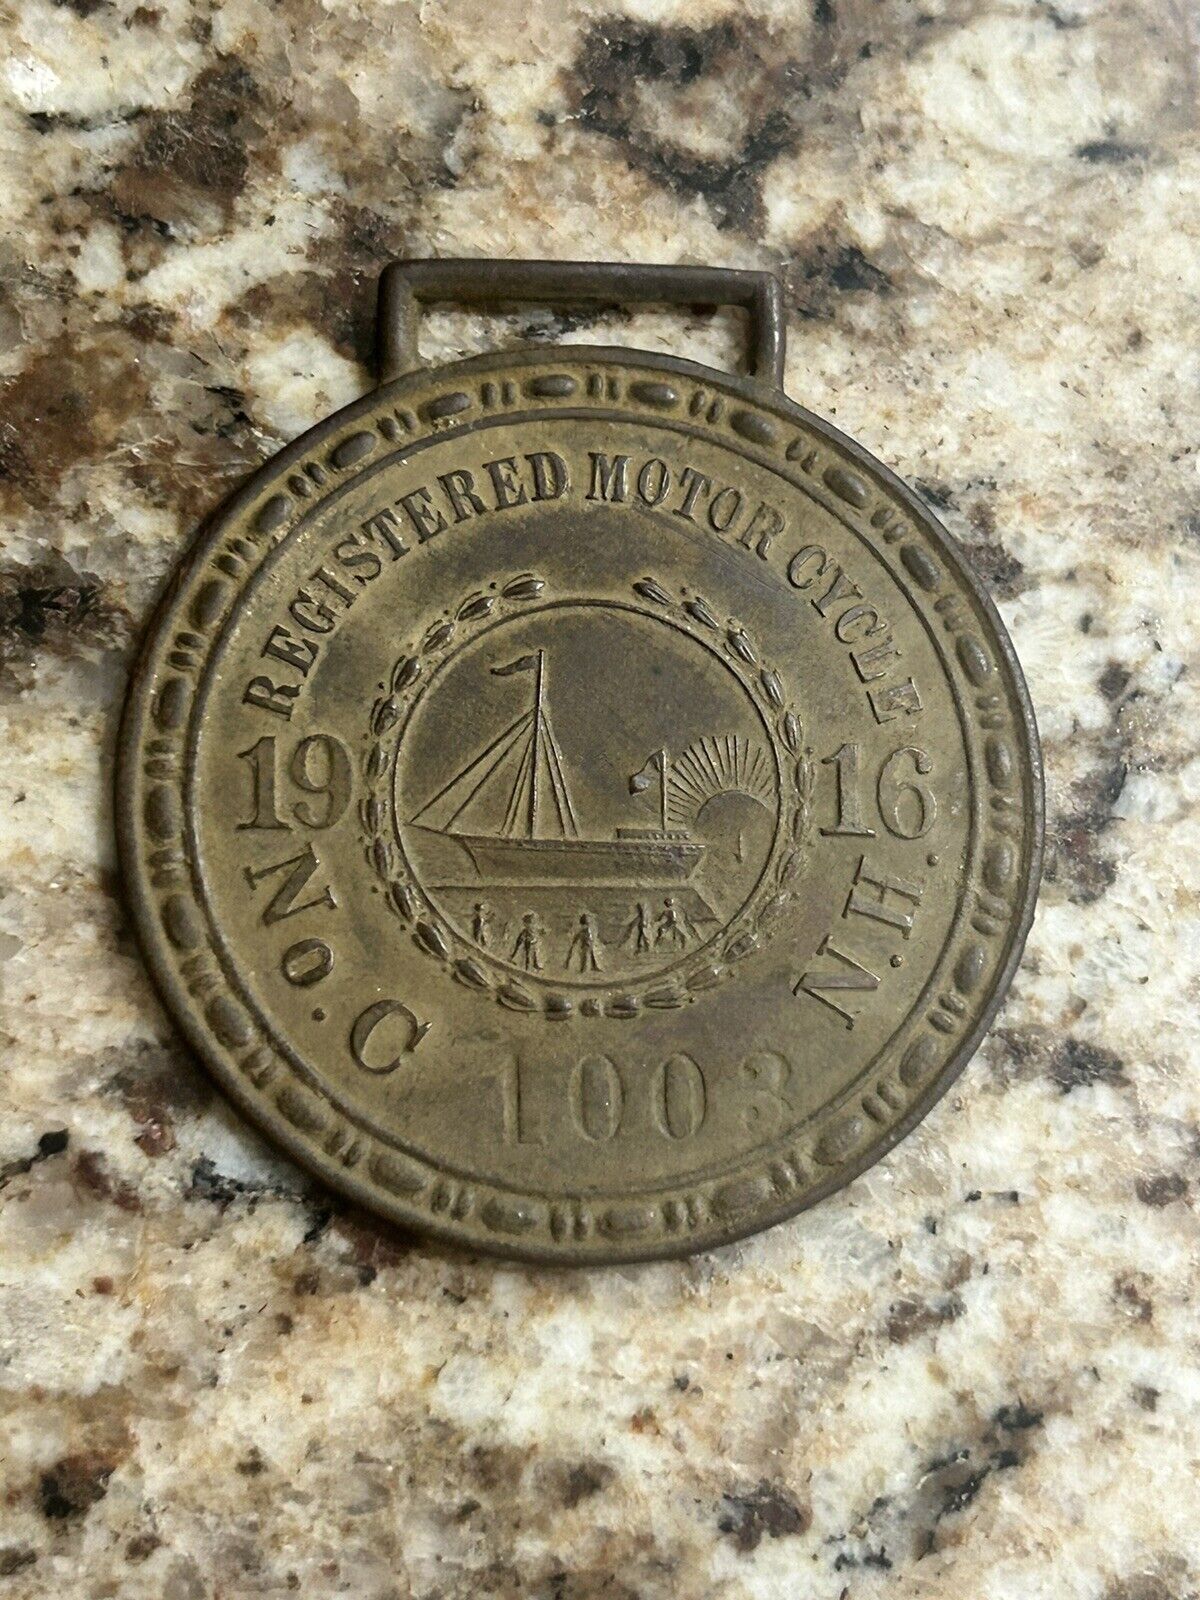 1916 New Hampshire Motorcycle Registration Disk.